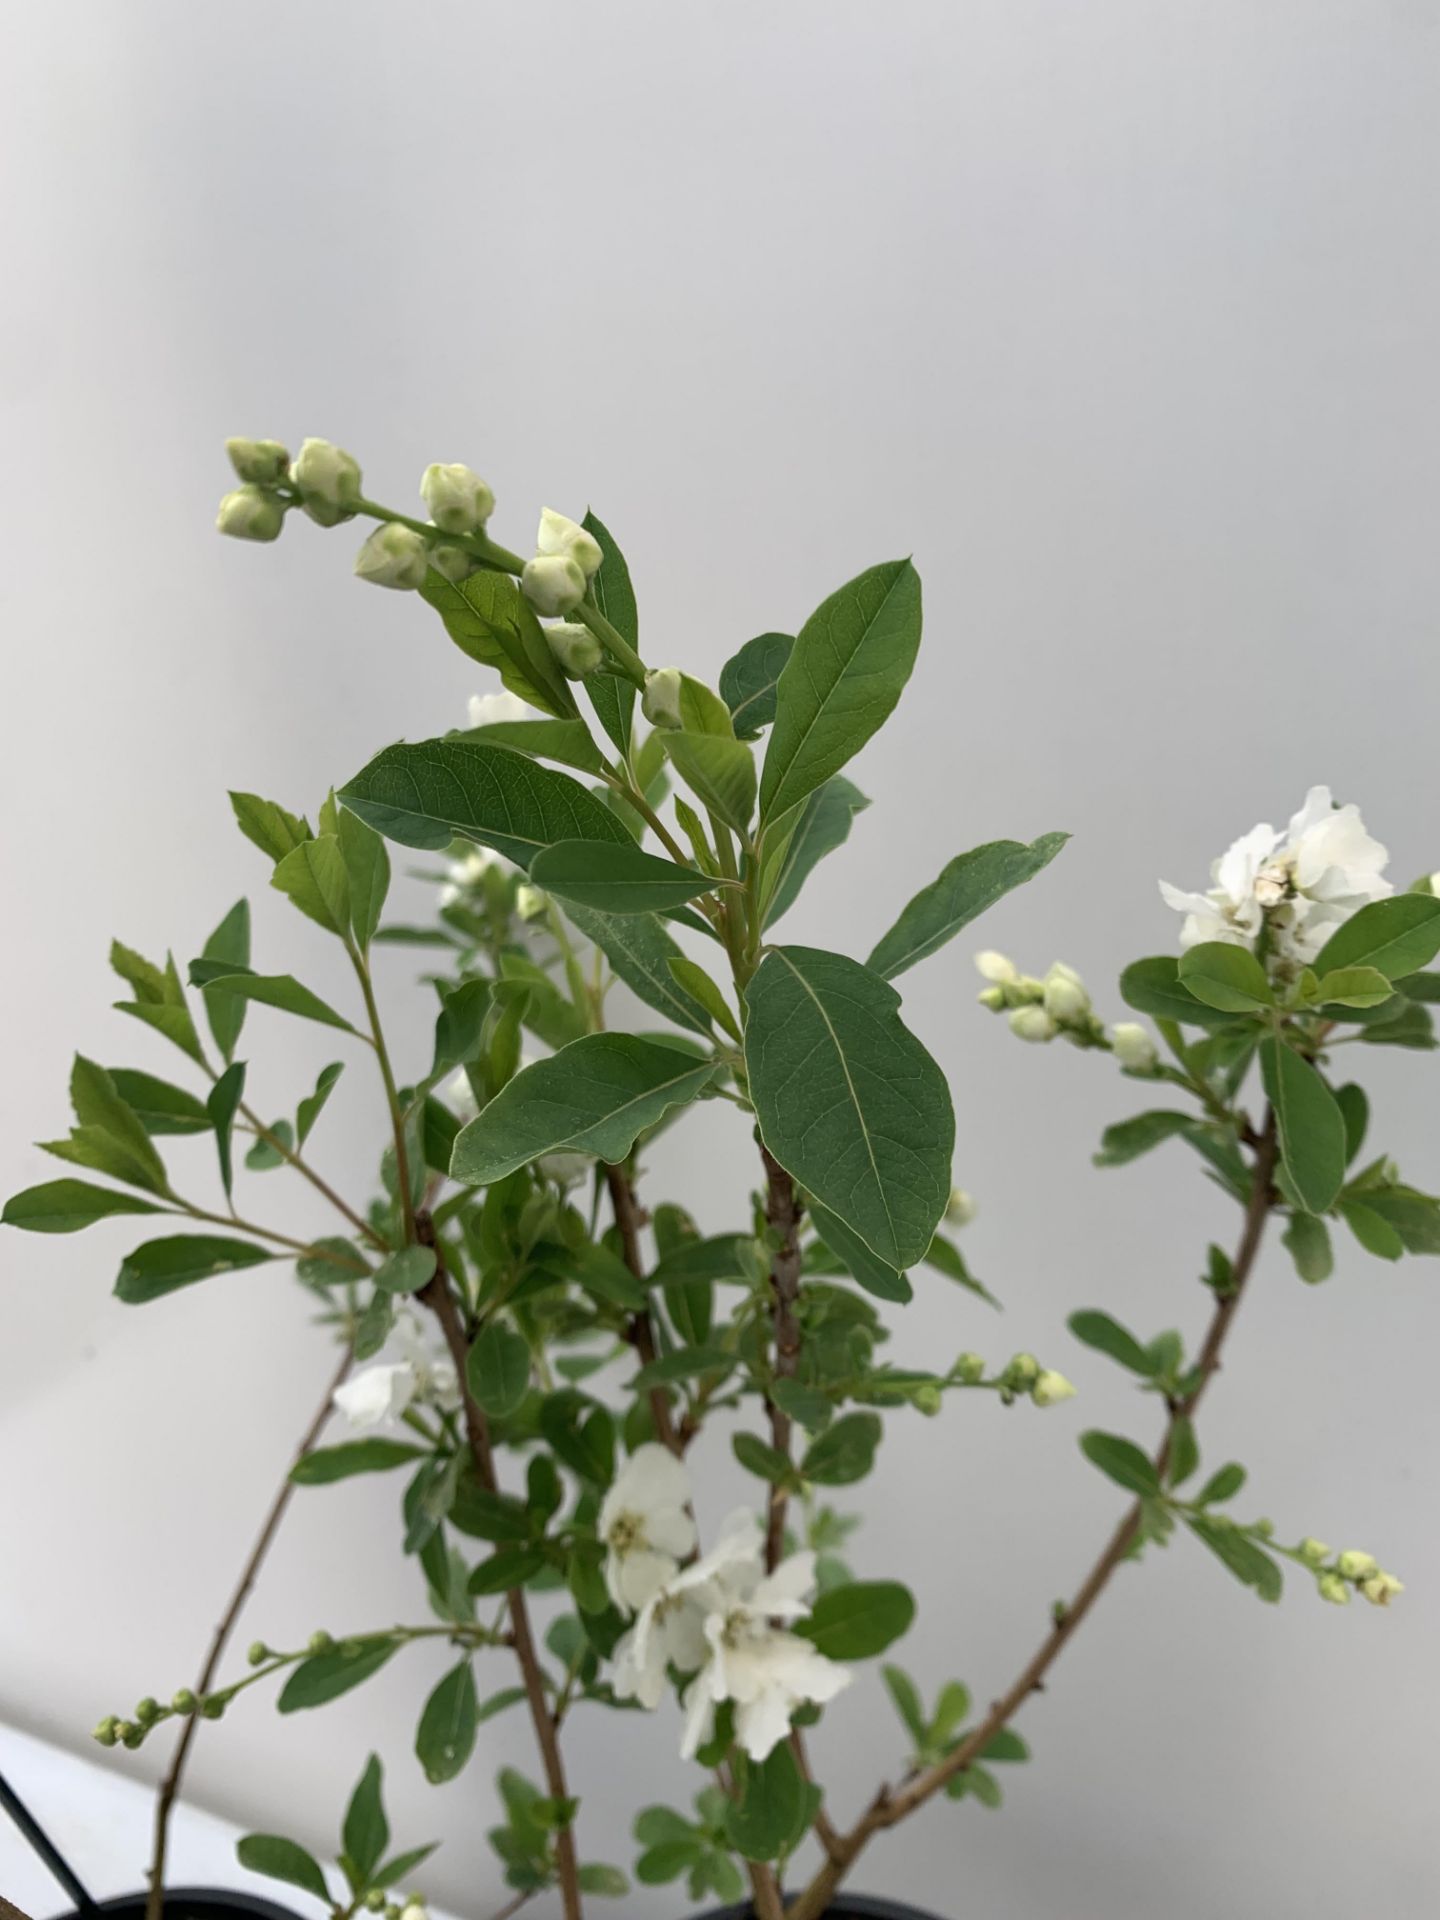 TWO EXOCHORDA RACEMOSA 'NIAGARA' IN 3 LTR POTS APPROX 65CM IN HEIGHT PLUS VAT TO BE SOLD FOR THE TWO - Image 5 of 12